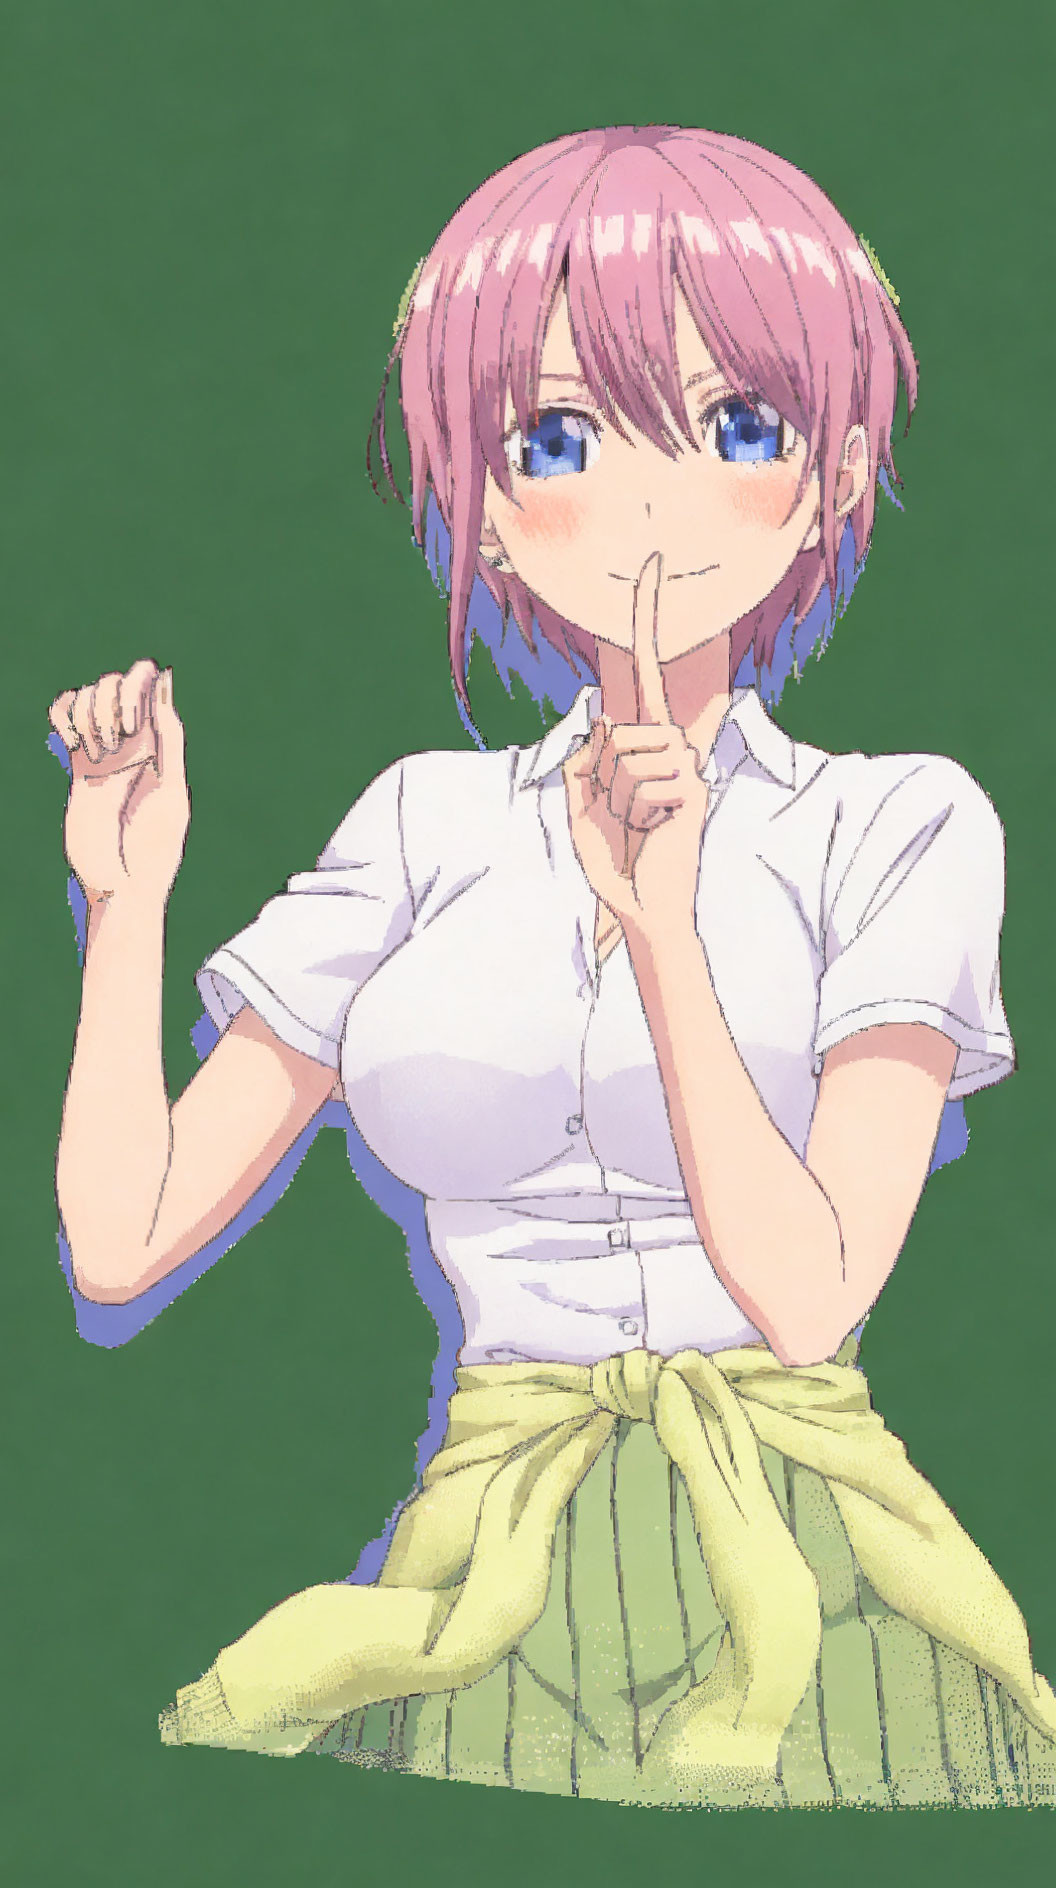 Pink-haired animated character in white shirt and yellow tie on green background